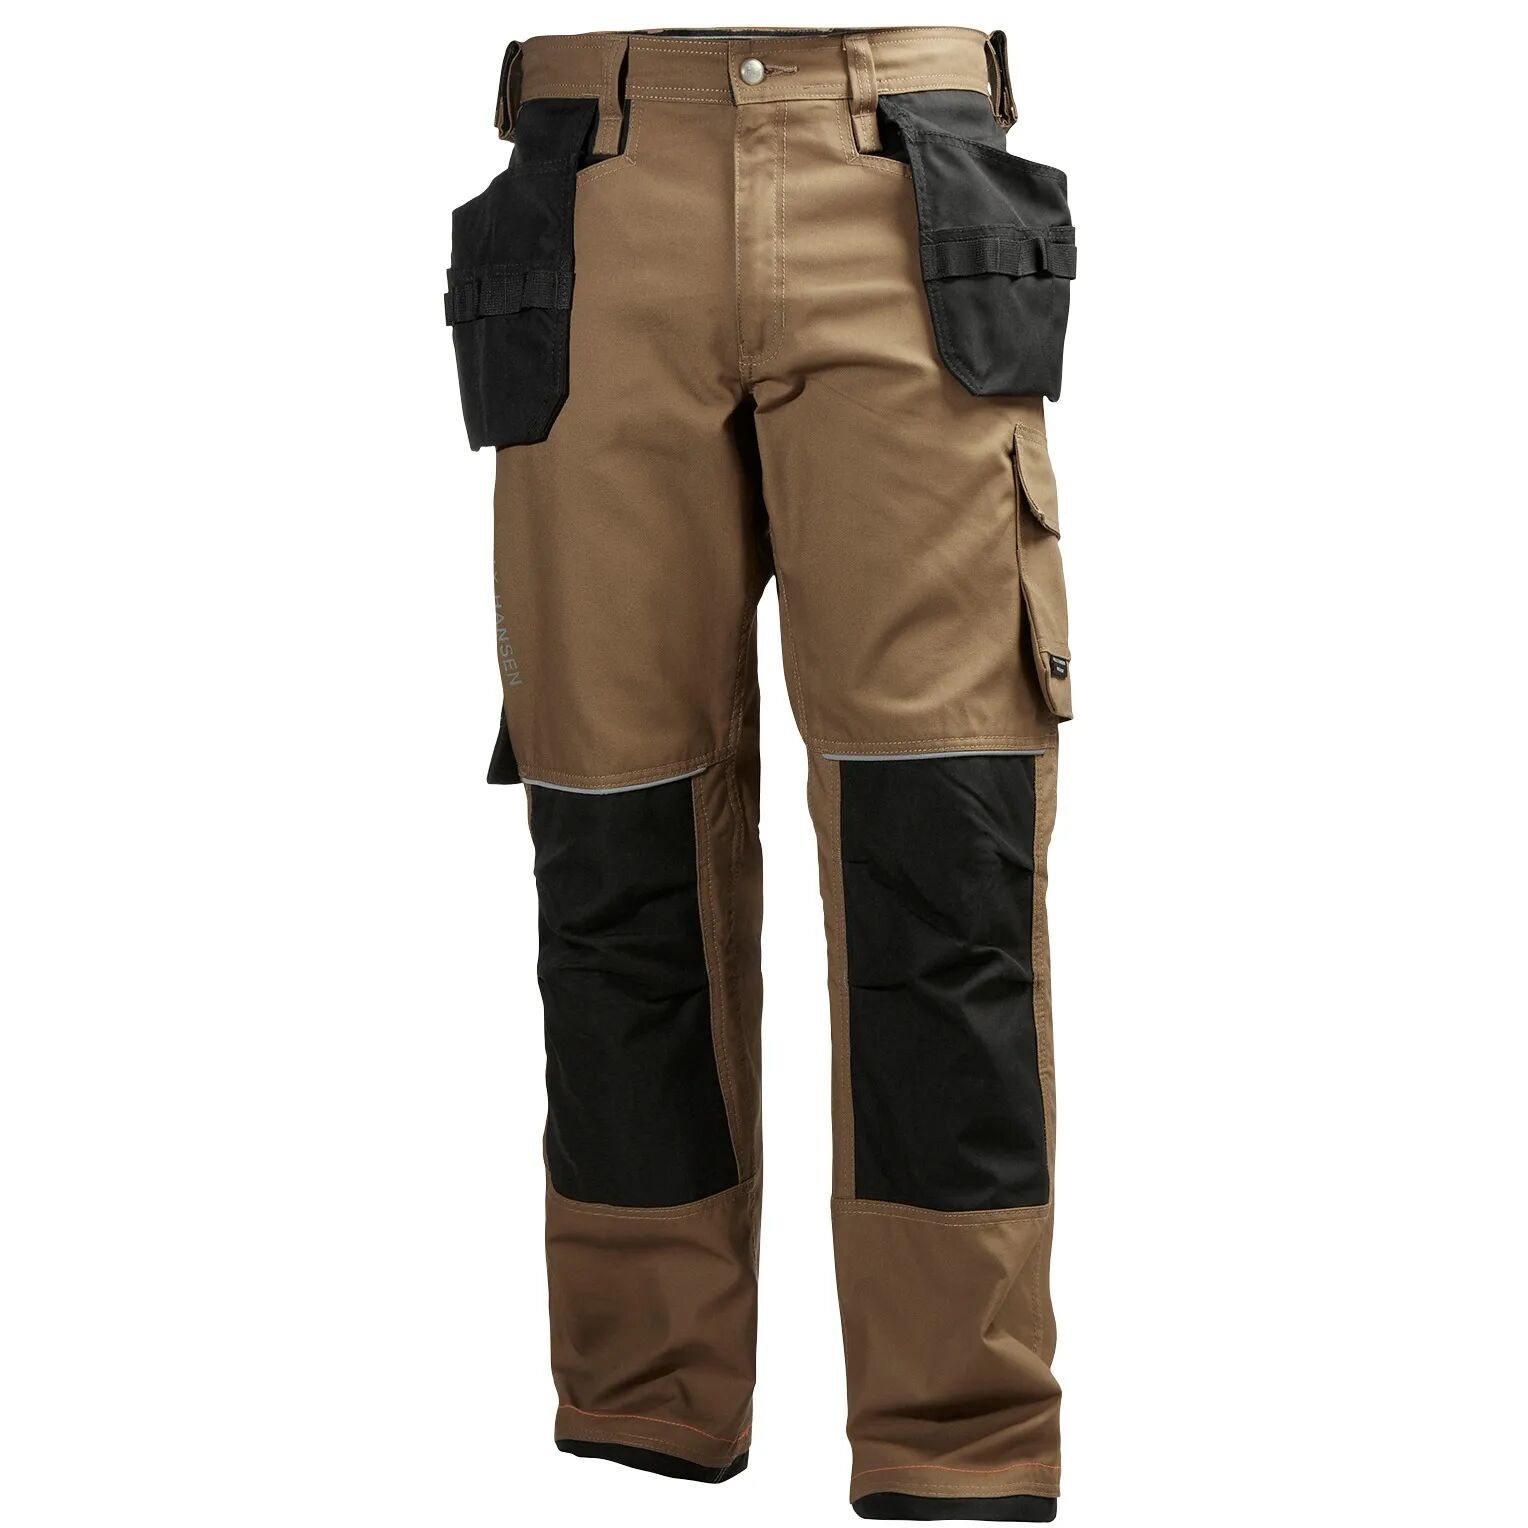 HH Workwear Helly Hansen WorkwearChelsea Durable Reflective Construction Pants Brown 44/30